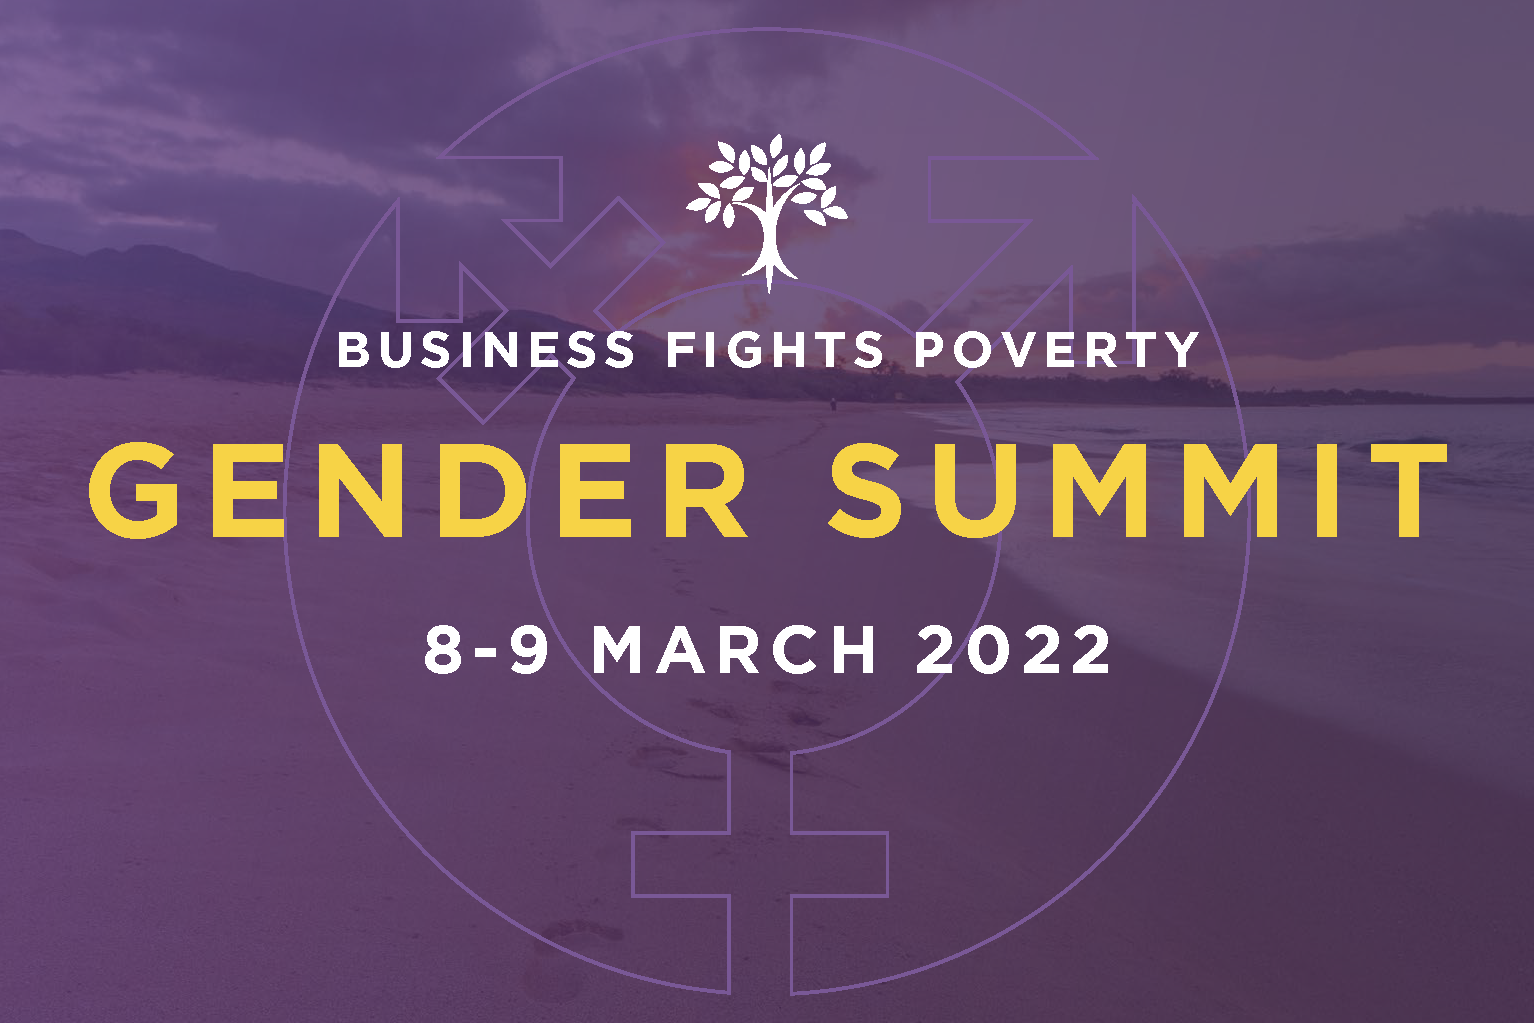 Business fights poverty gender summit